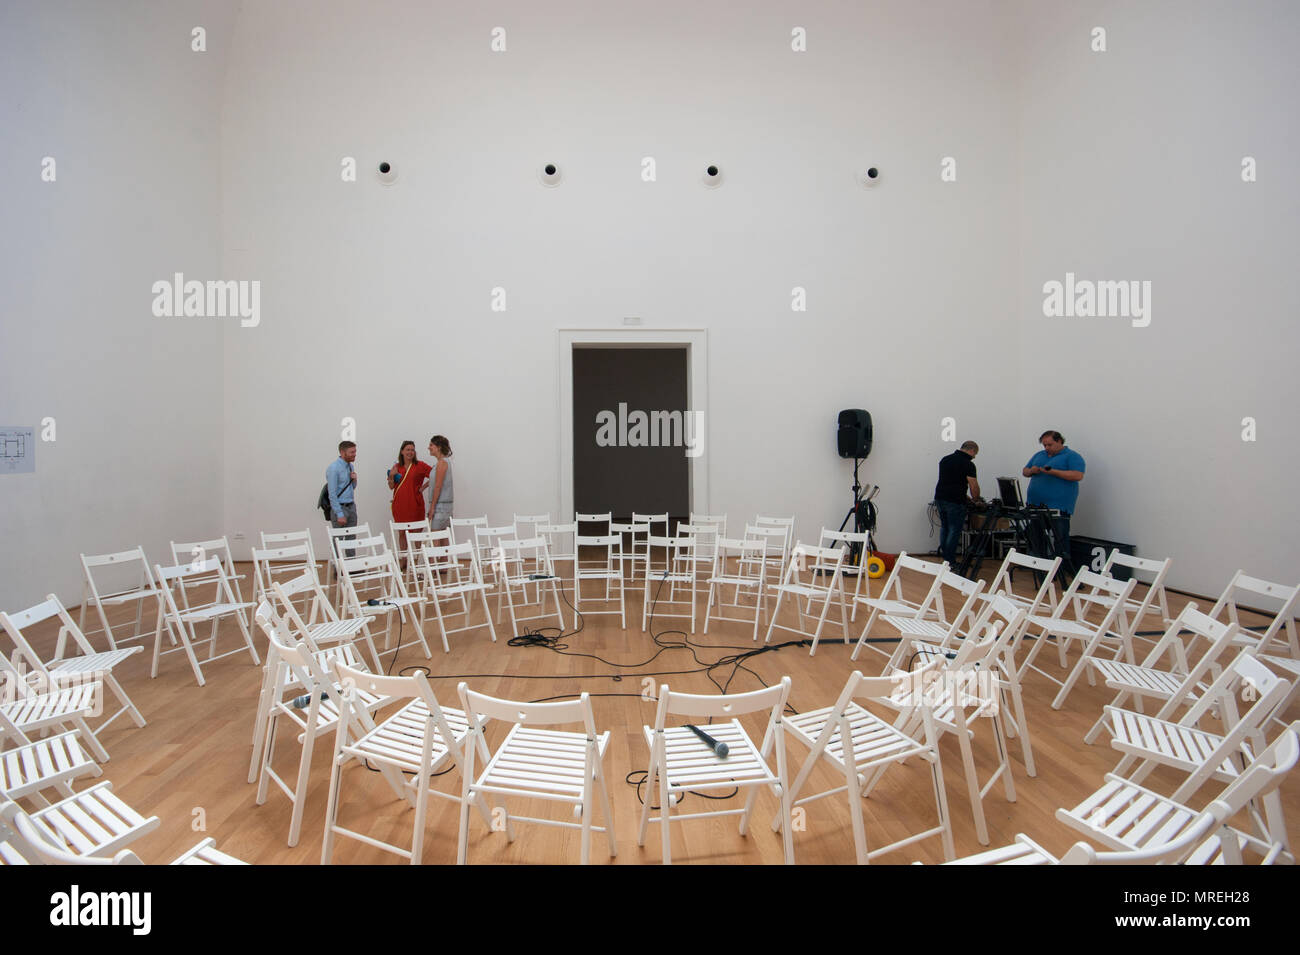 Island - The British Pavilion at the 2018 Venice Architecture Biennale designed by Caruso St John Architects Stock Photo